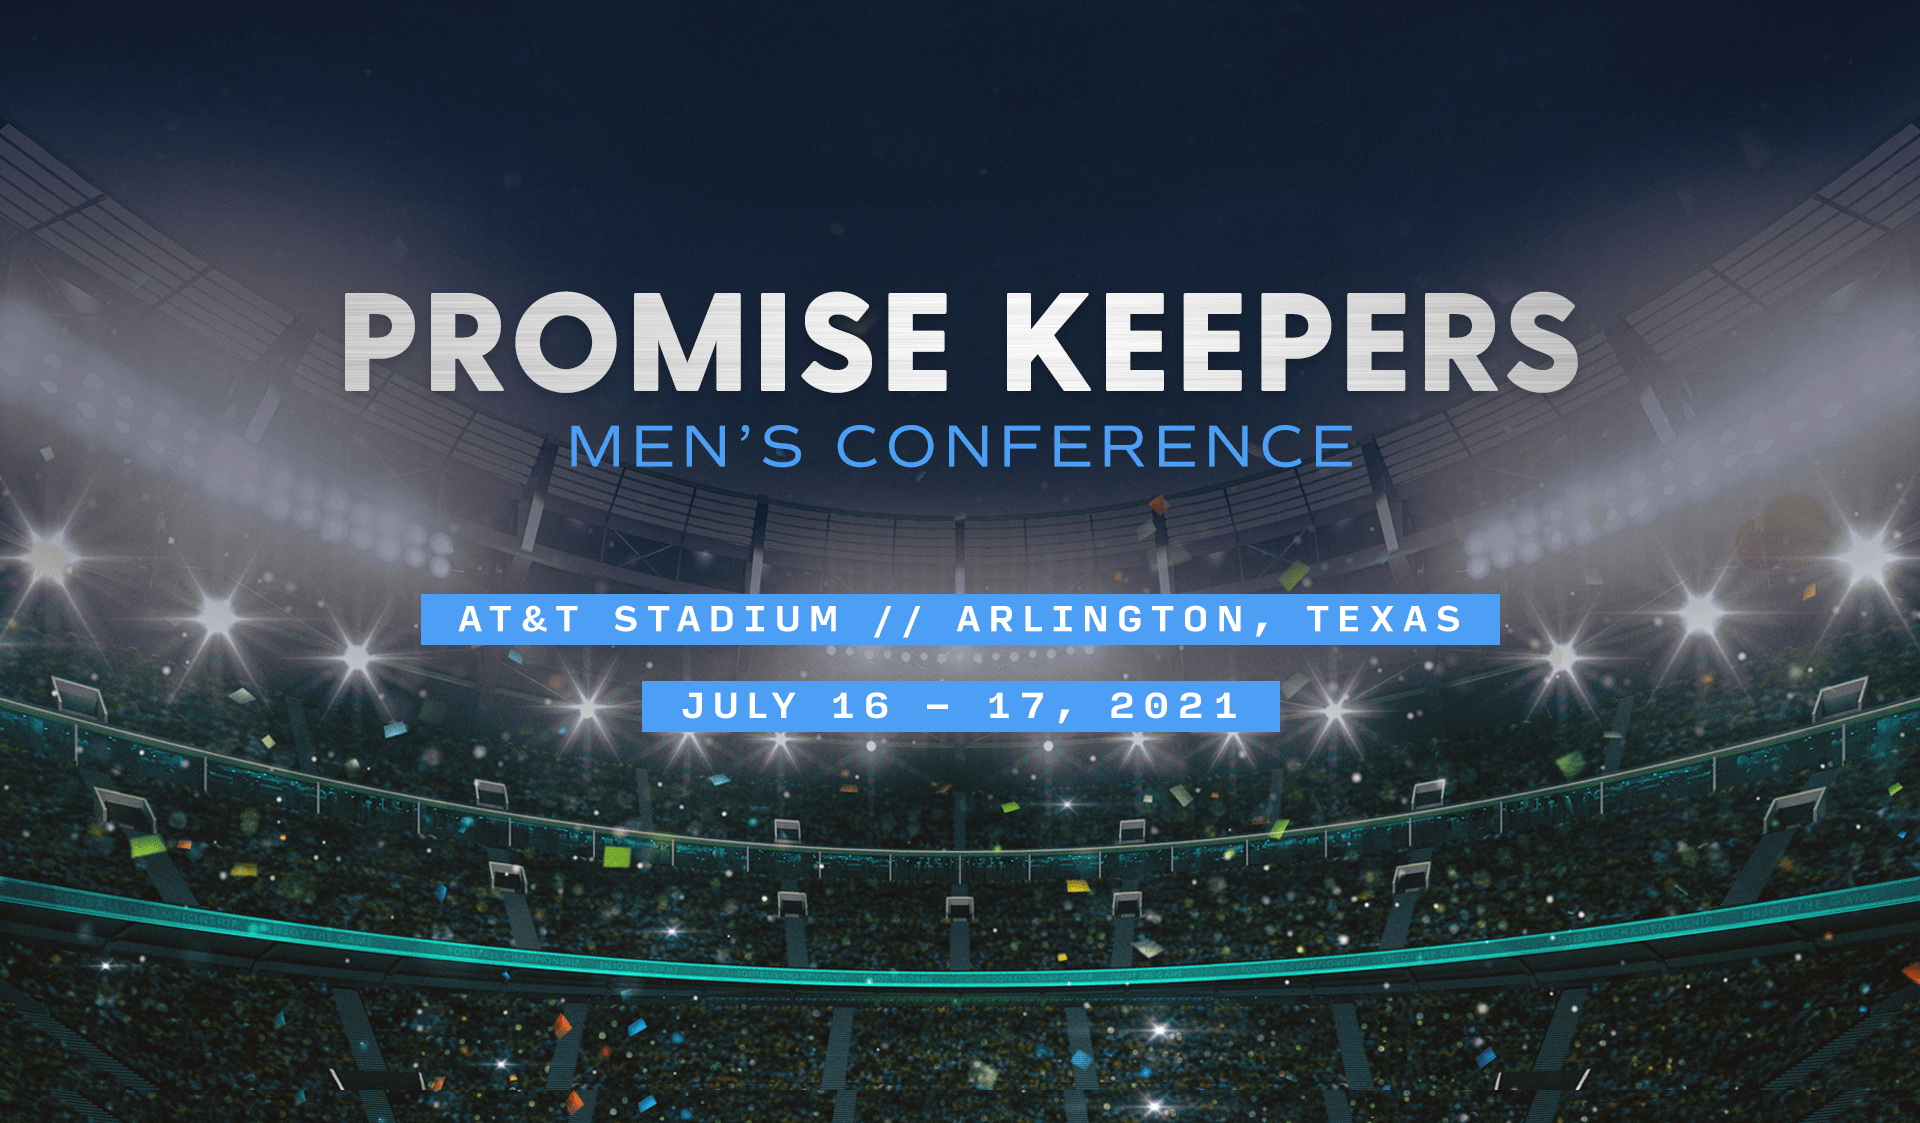 On July 16 and July 17, Promise Keepers (PK), will hold its 2021 national men's conference at AT&T Stadium, home of the Dallas Cowboys.